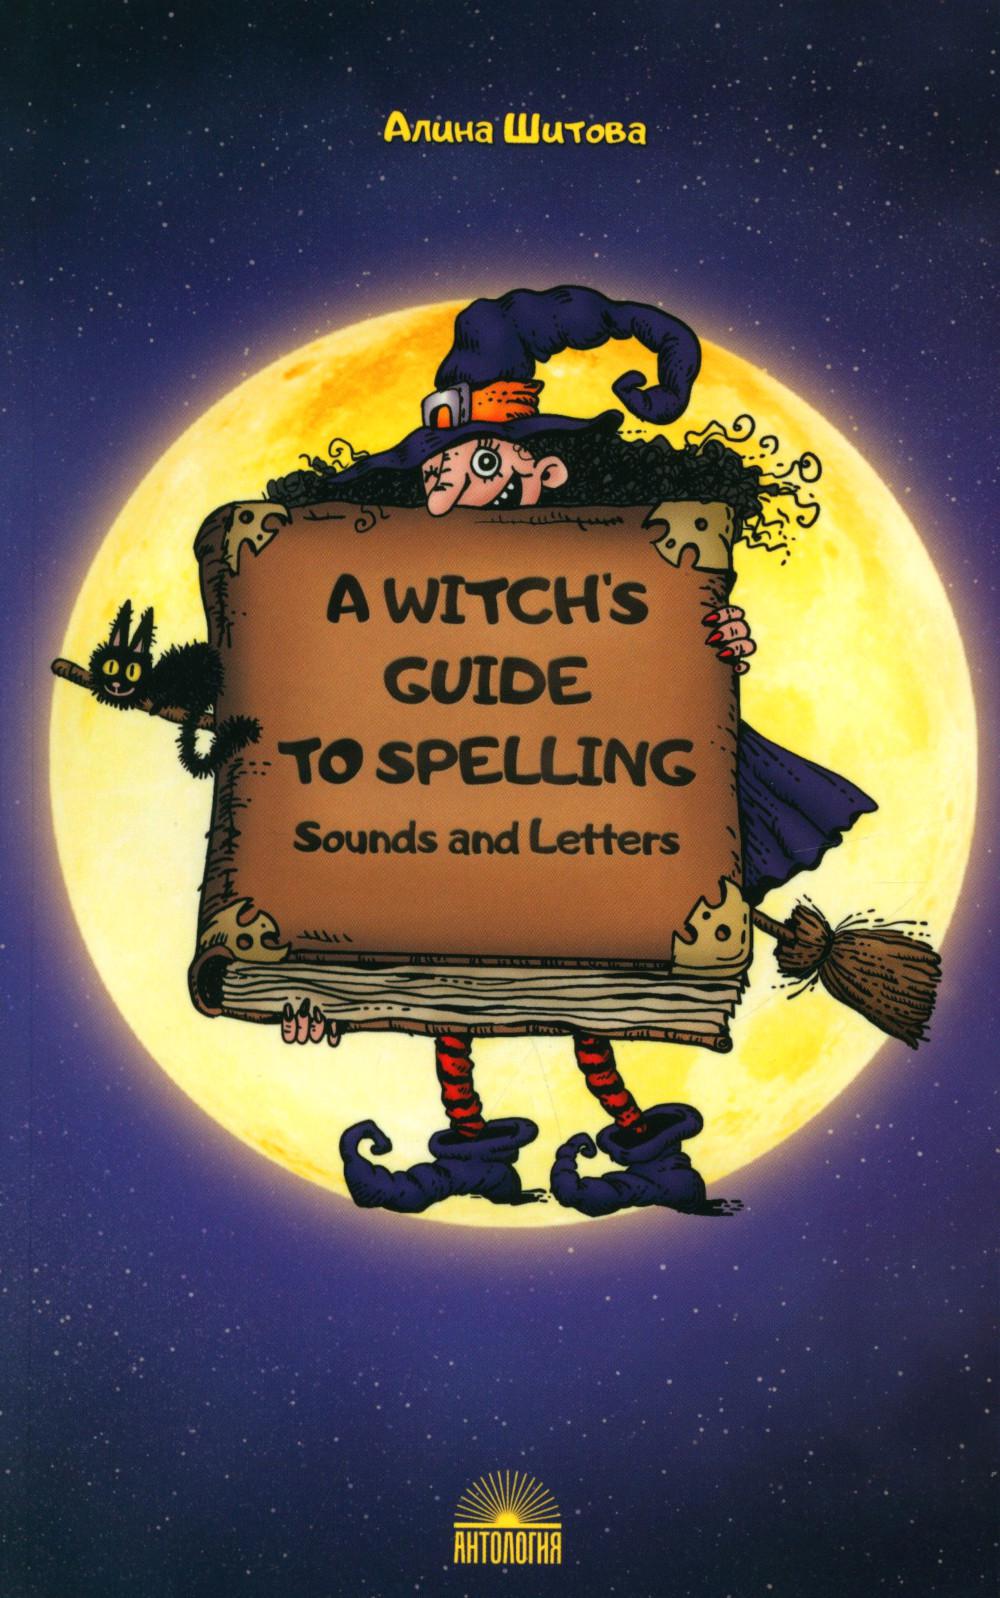   (A Witchs Guide to Spelling: Sounds and Letters).  